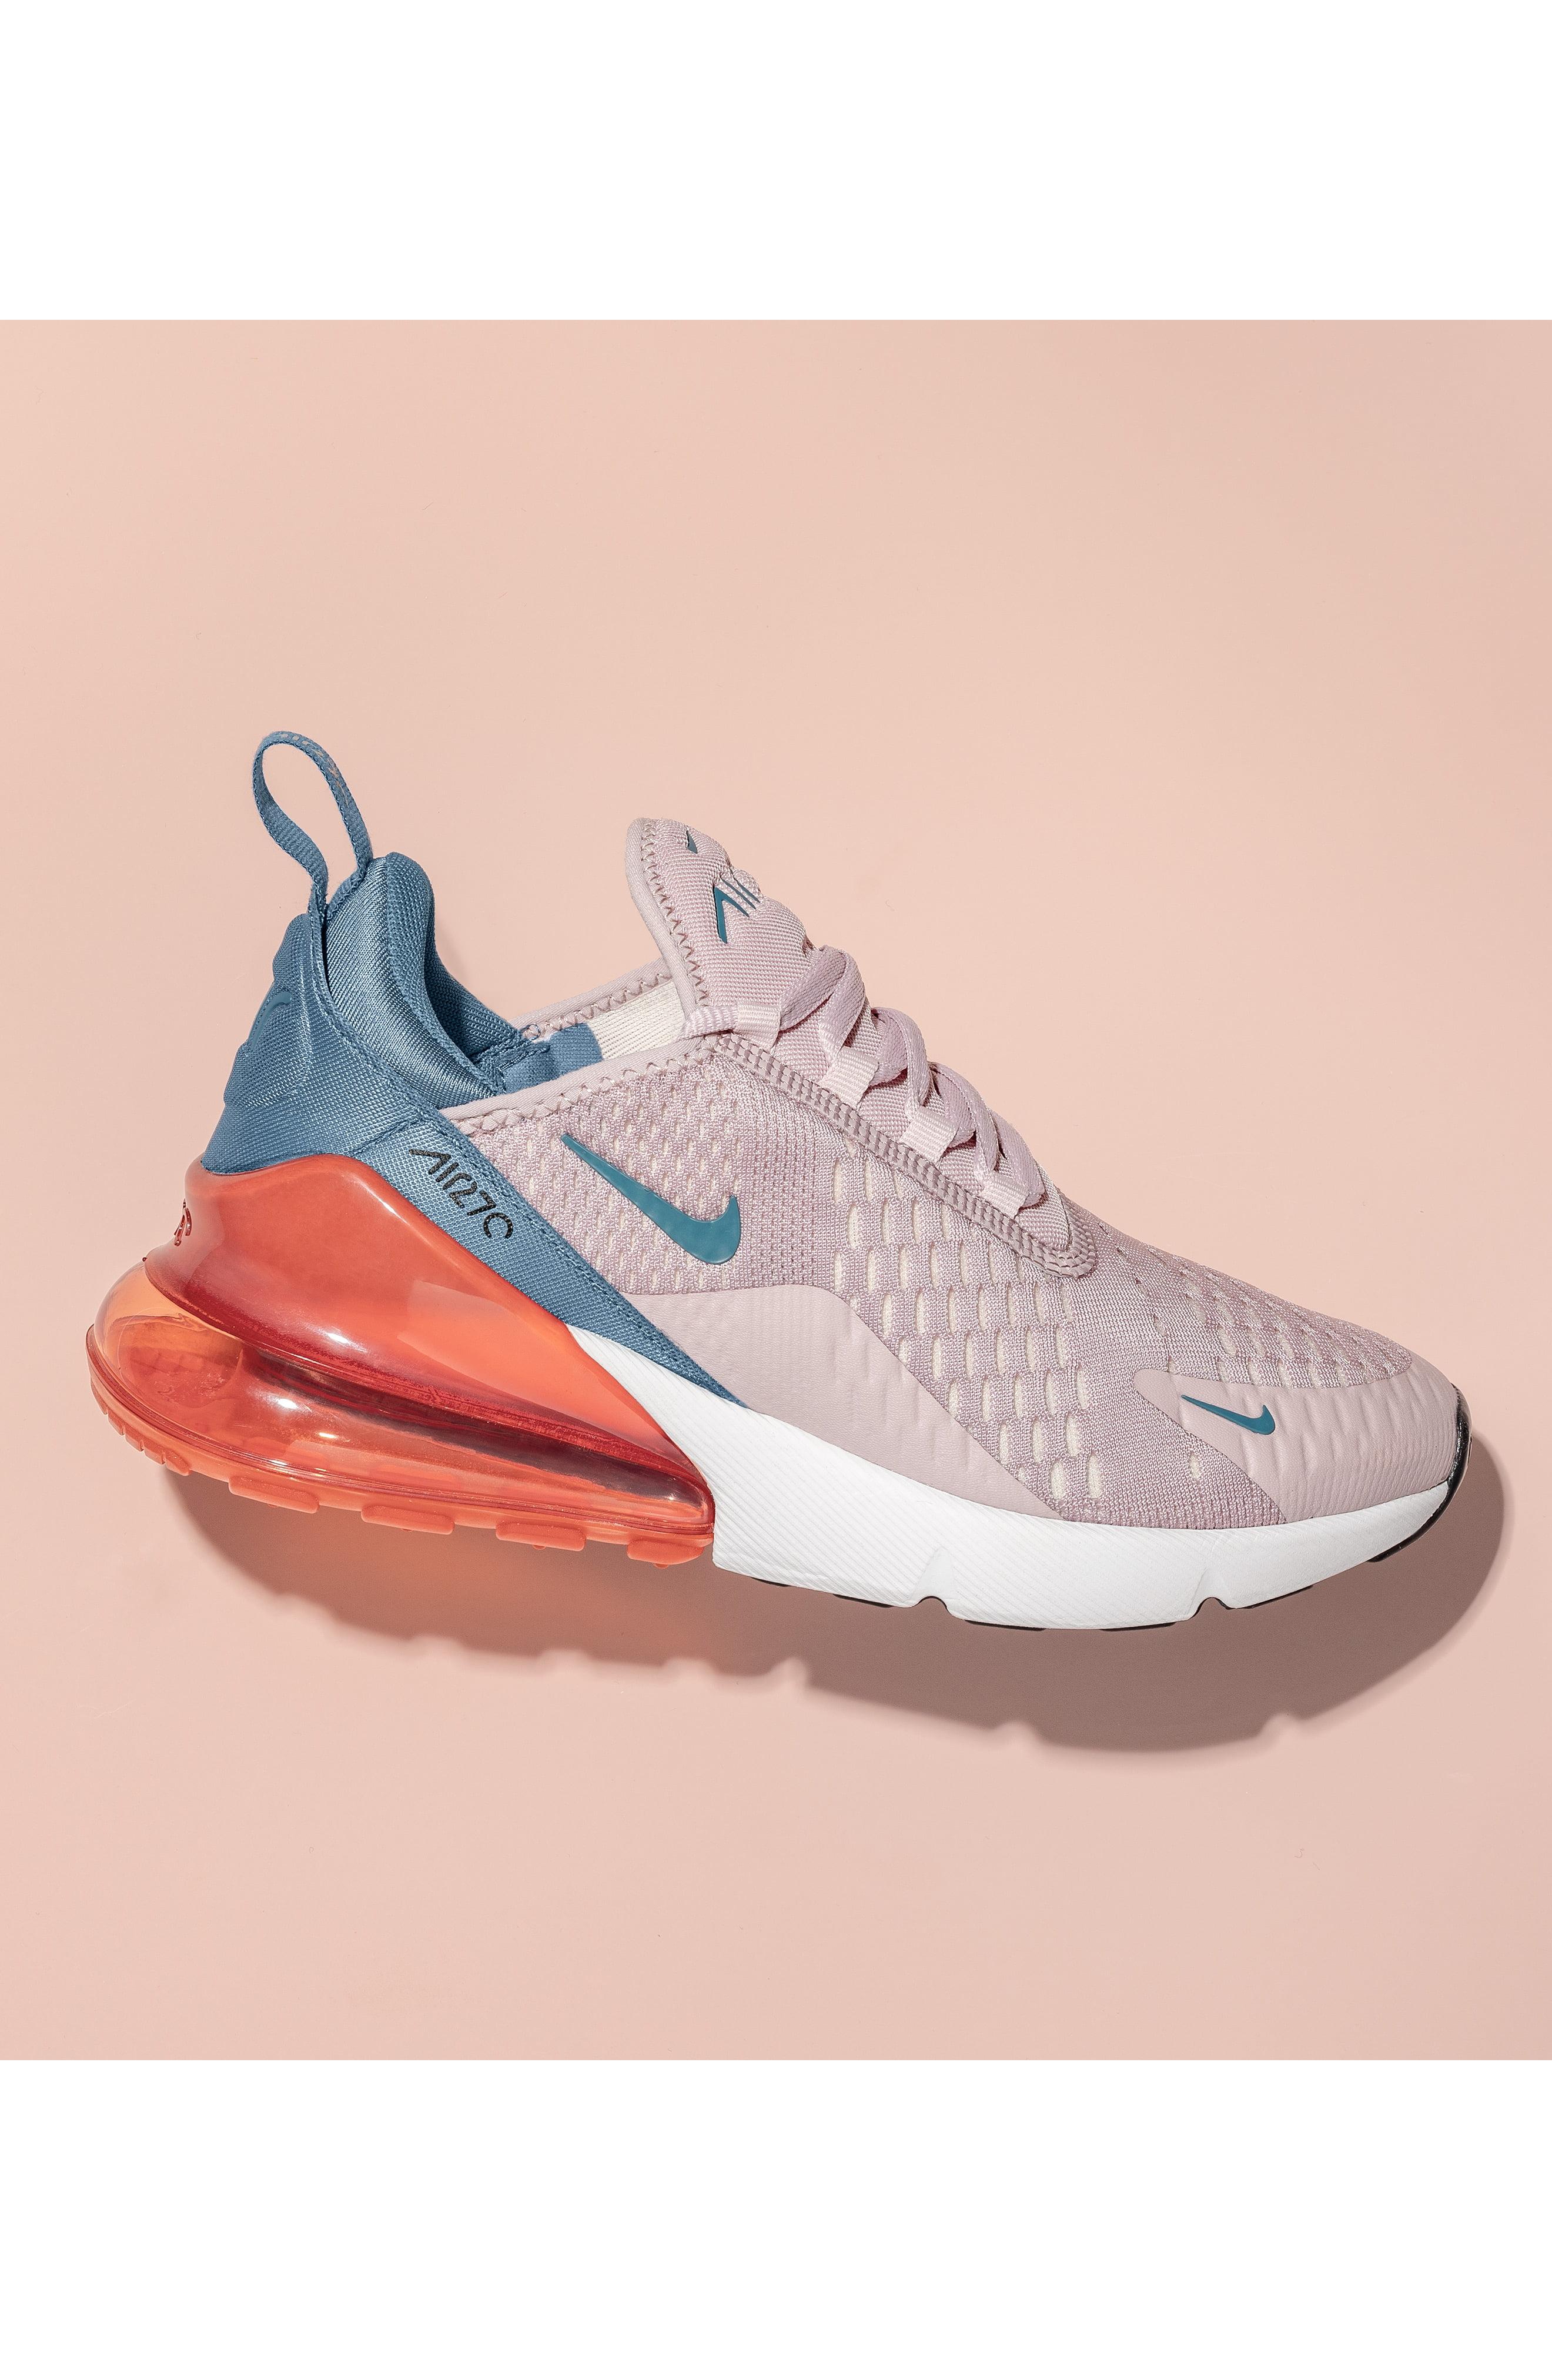 Nike Womens Air Max 270 Shoes in Yellow (White) - Lyst